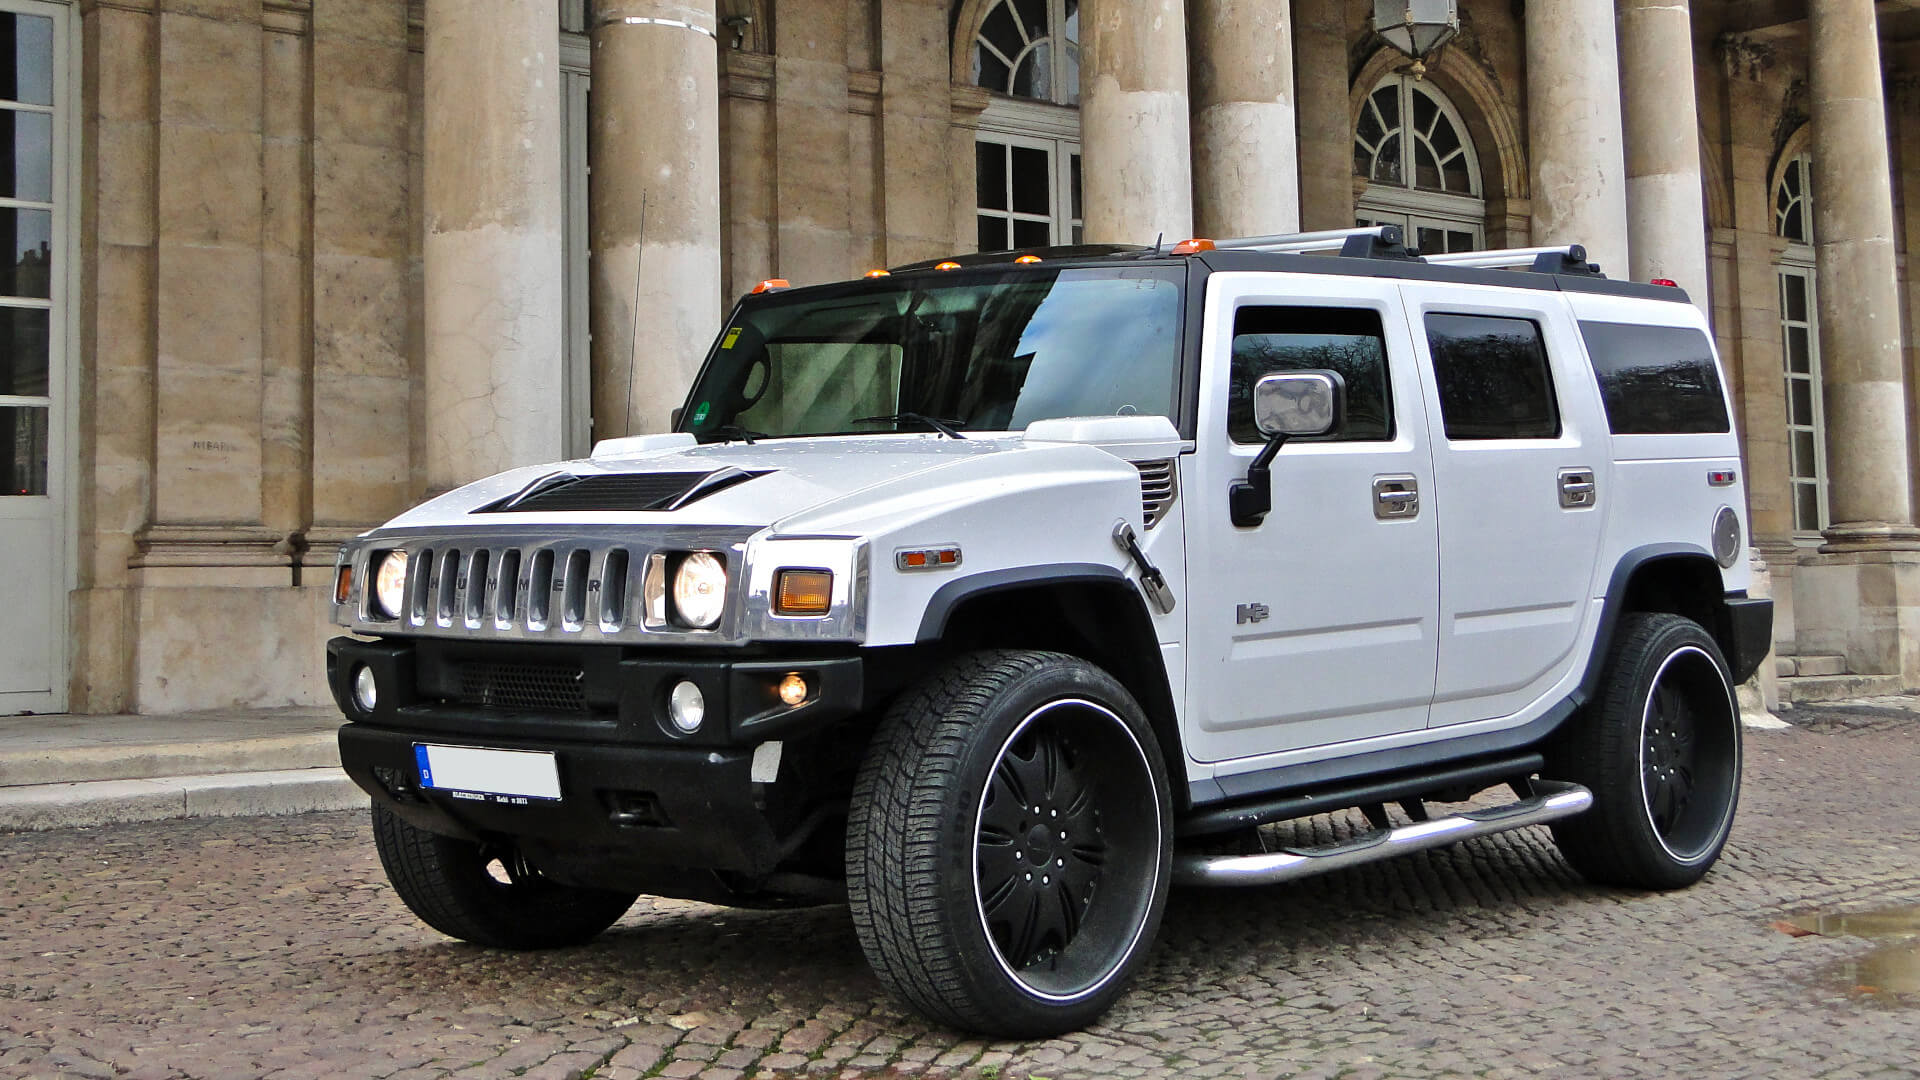 Direct4x4 Accessories for Hummer H2 Vehicles